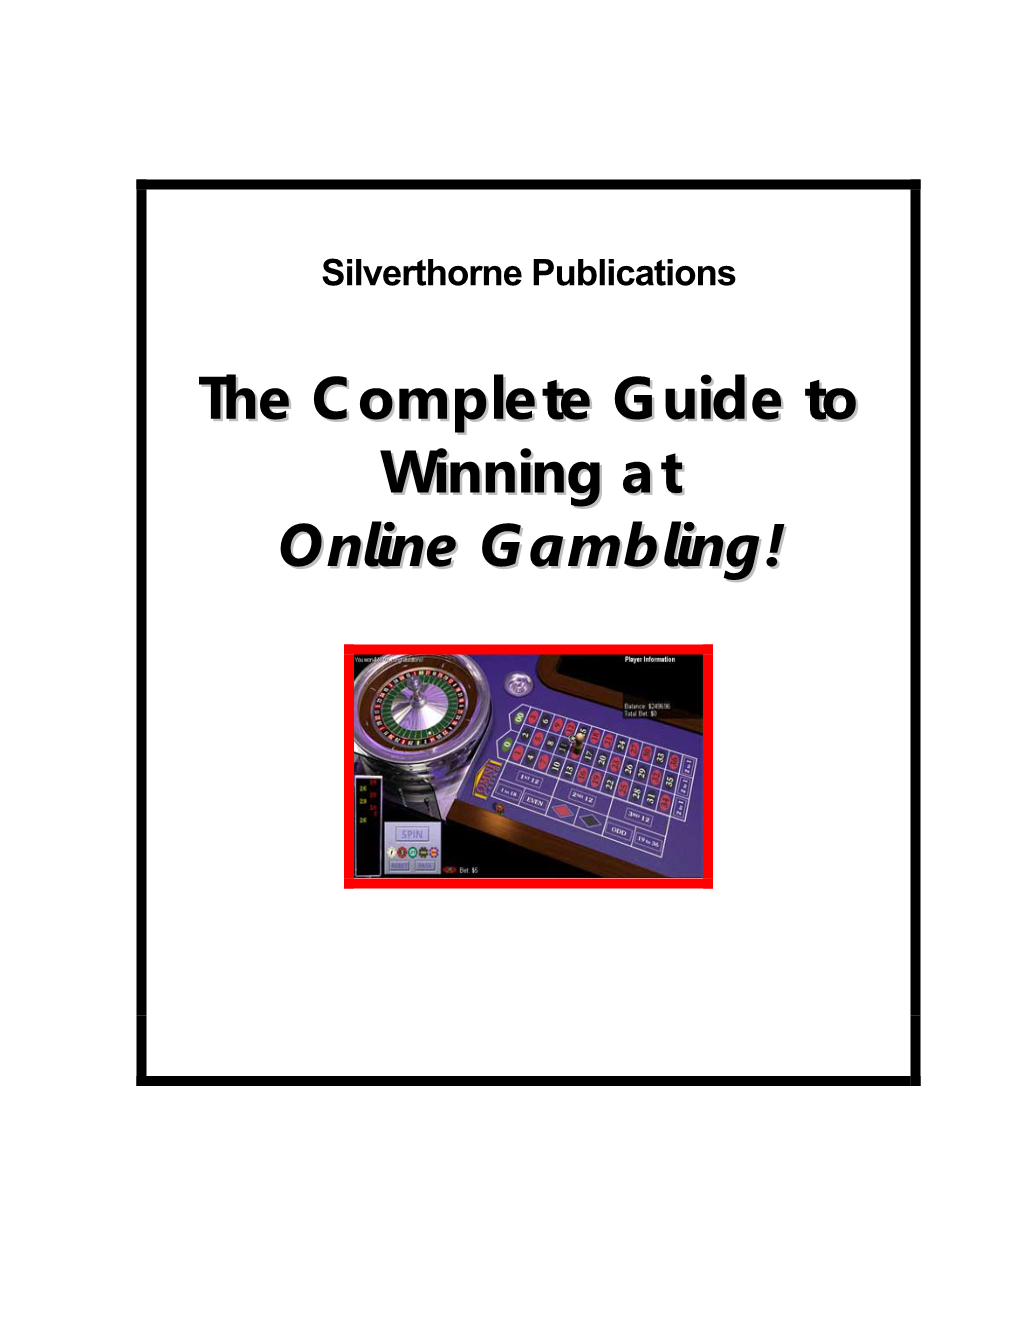 The Complete Guide to Winning at Online Gambling!